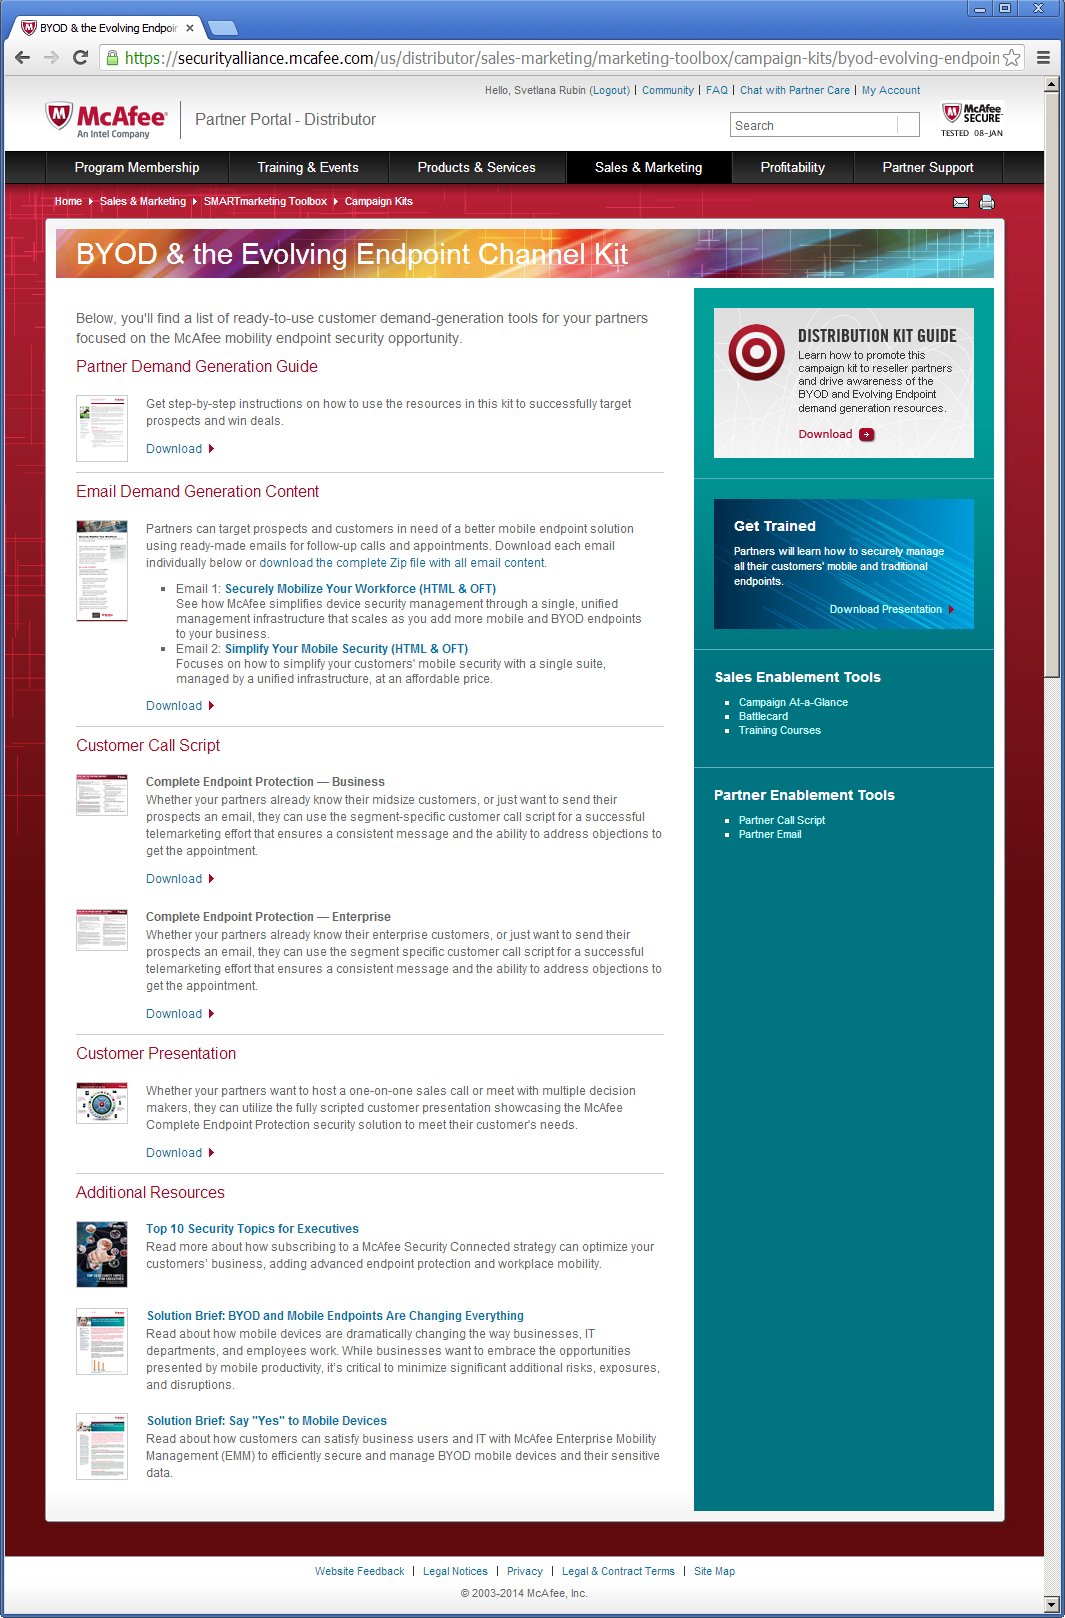 McAfee Partner Portal Campaign Kits detail page